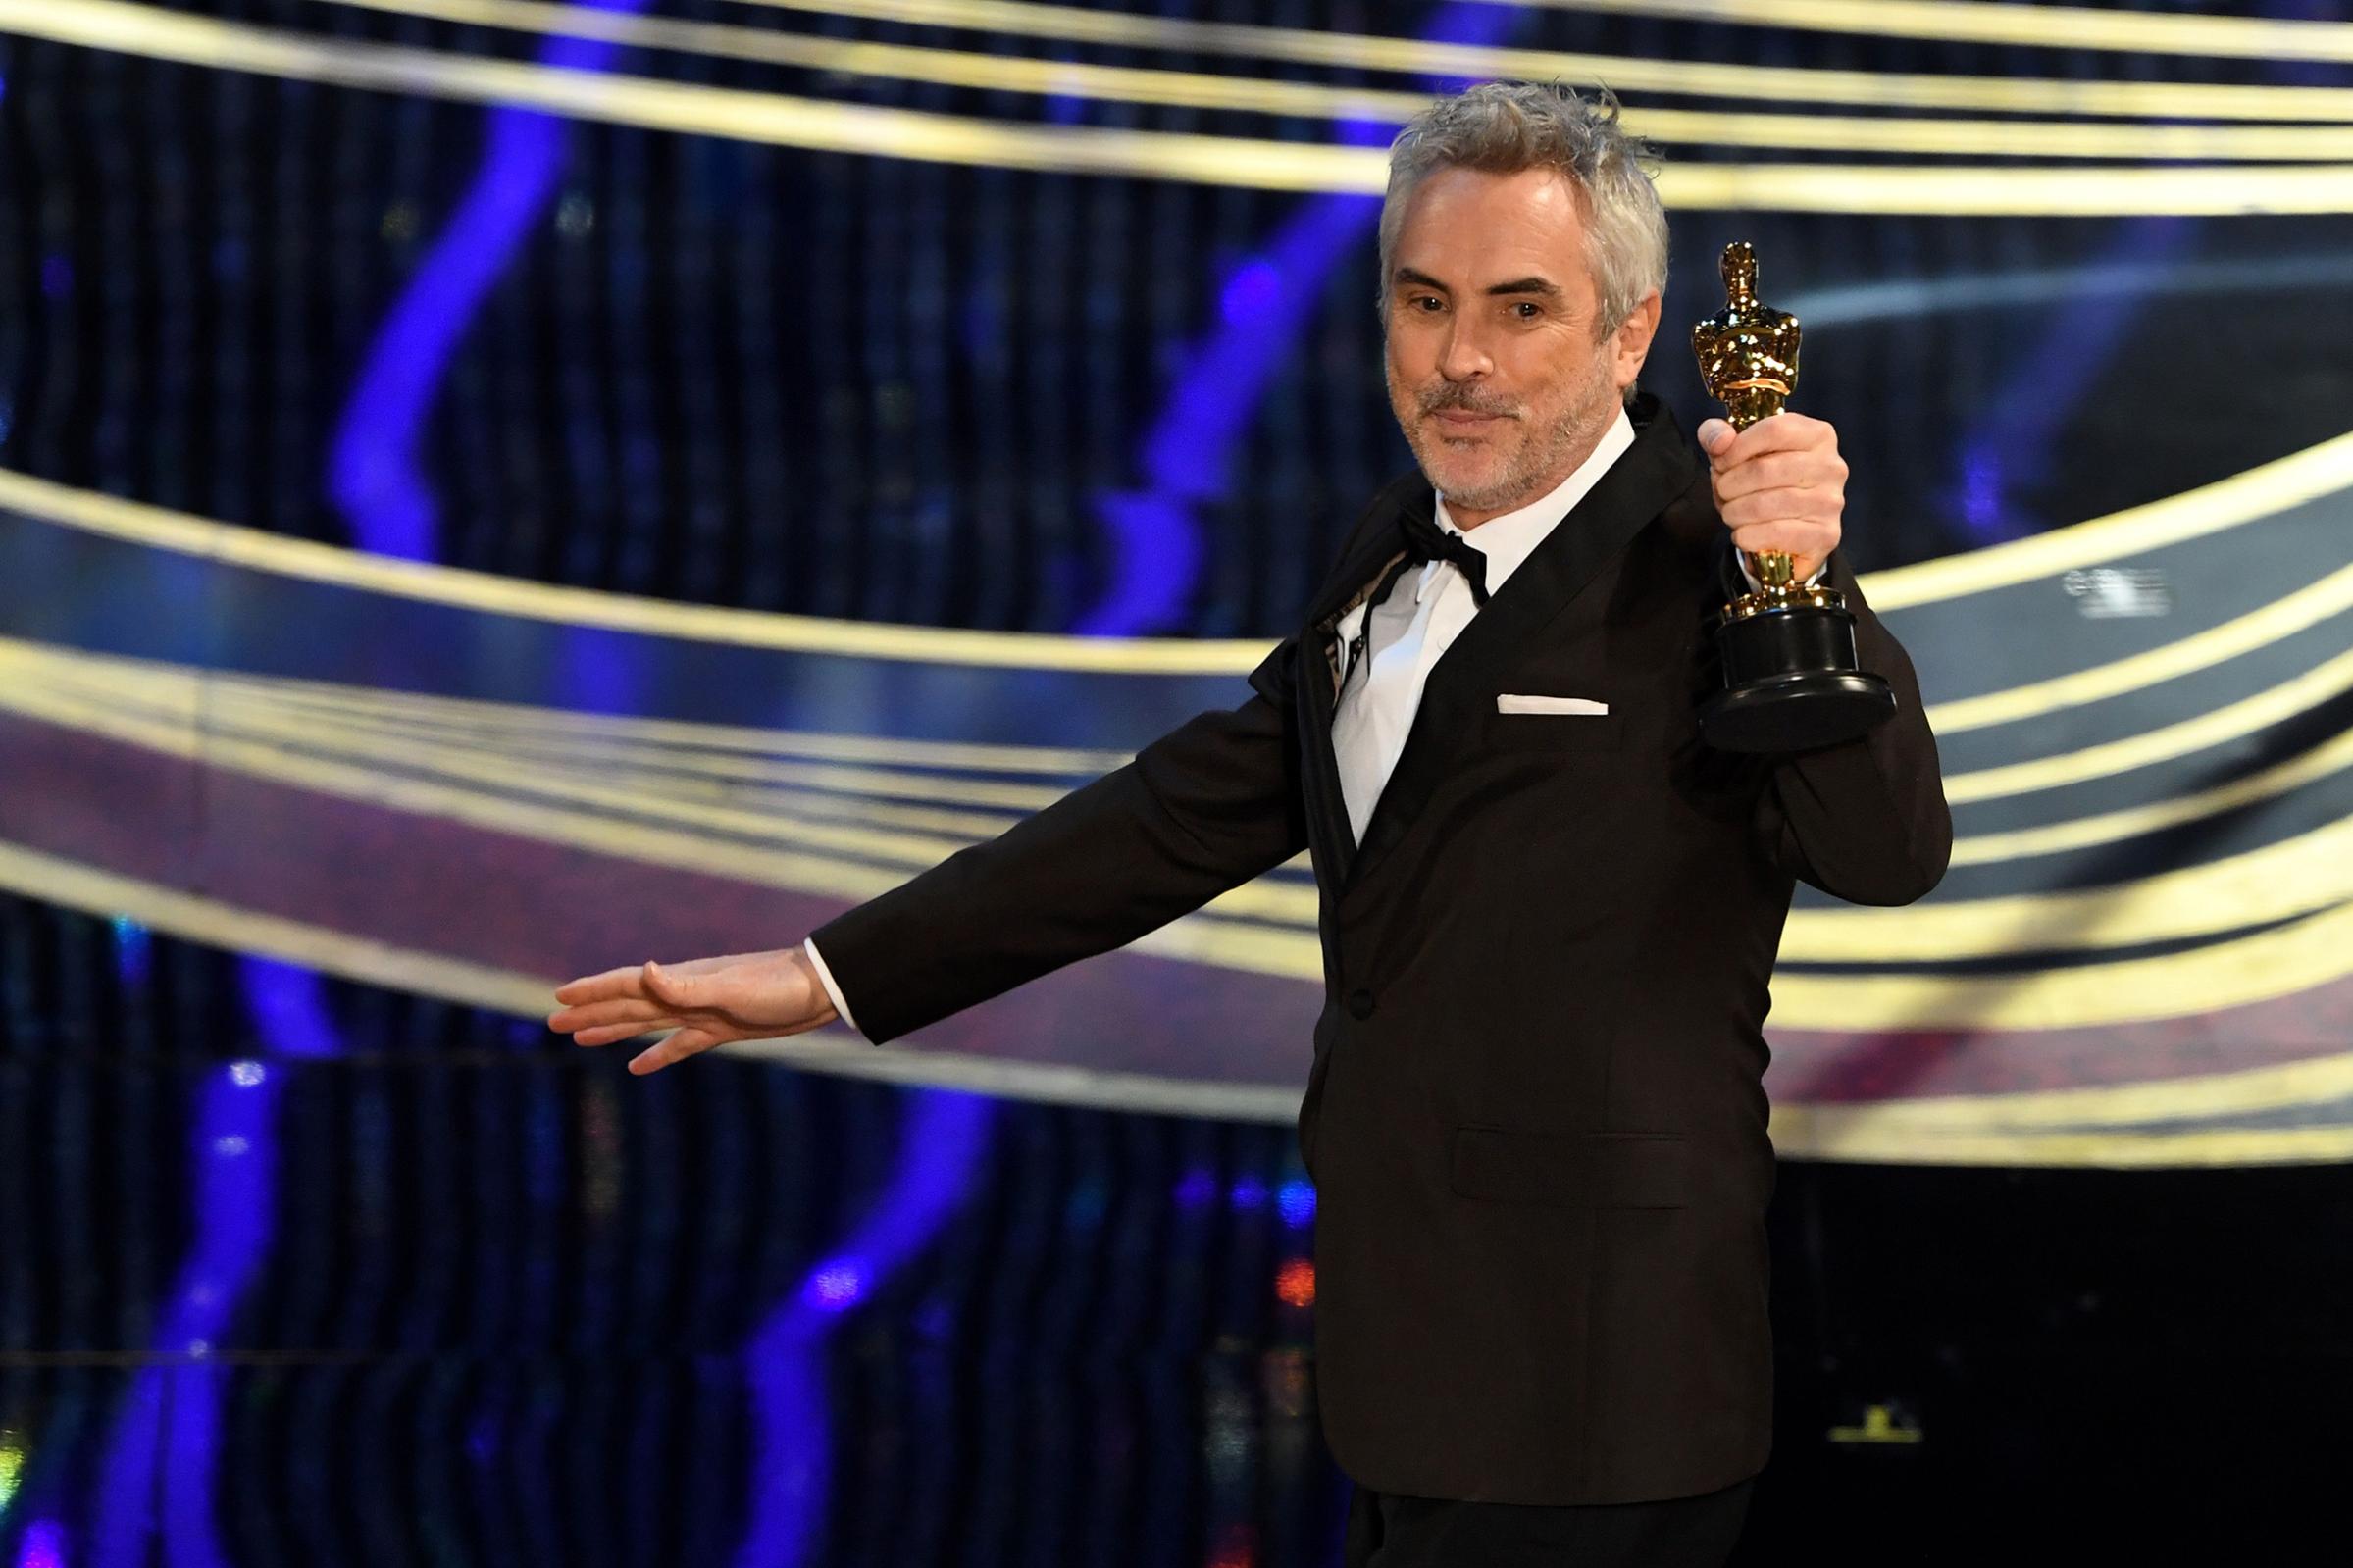 Best Cinematography nominee for "Roma" Alfonso Cuaron accepts the award for Best Cinematography during the 91st Annual Academy Awards at the Dolby Theatre in Hollywood on Feb. 24, 2019.